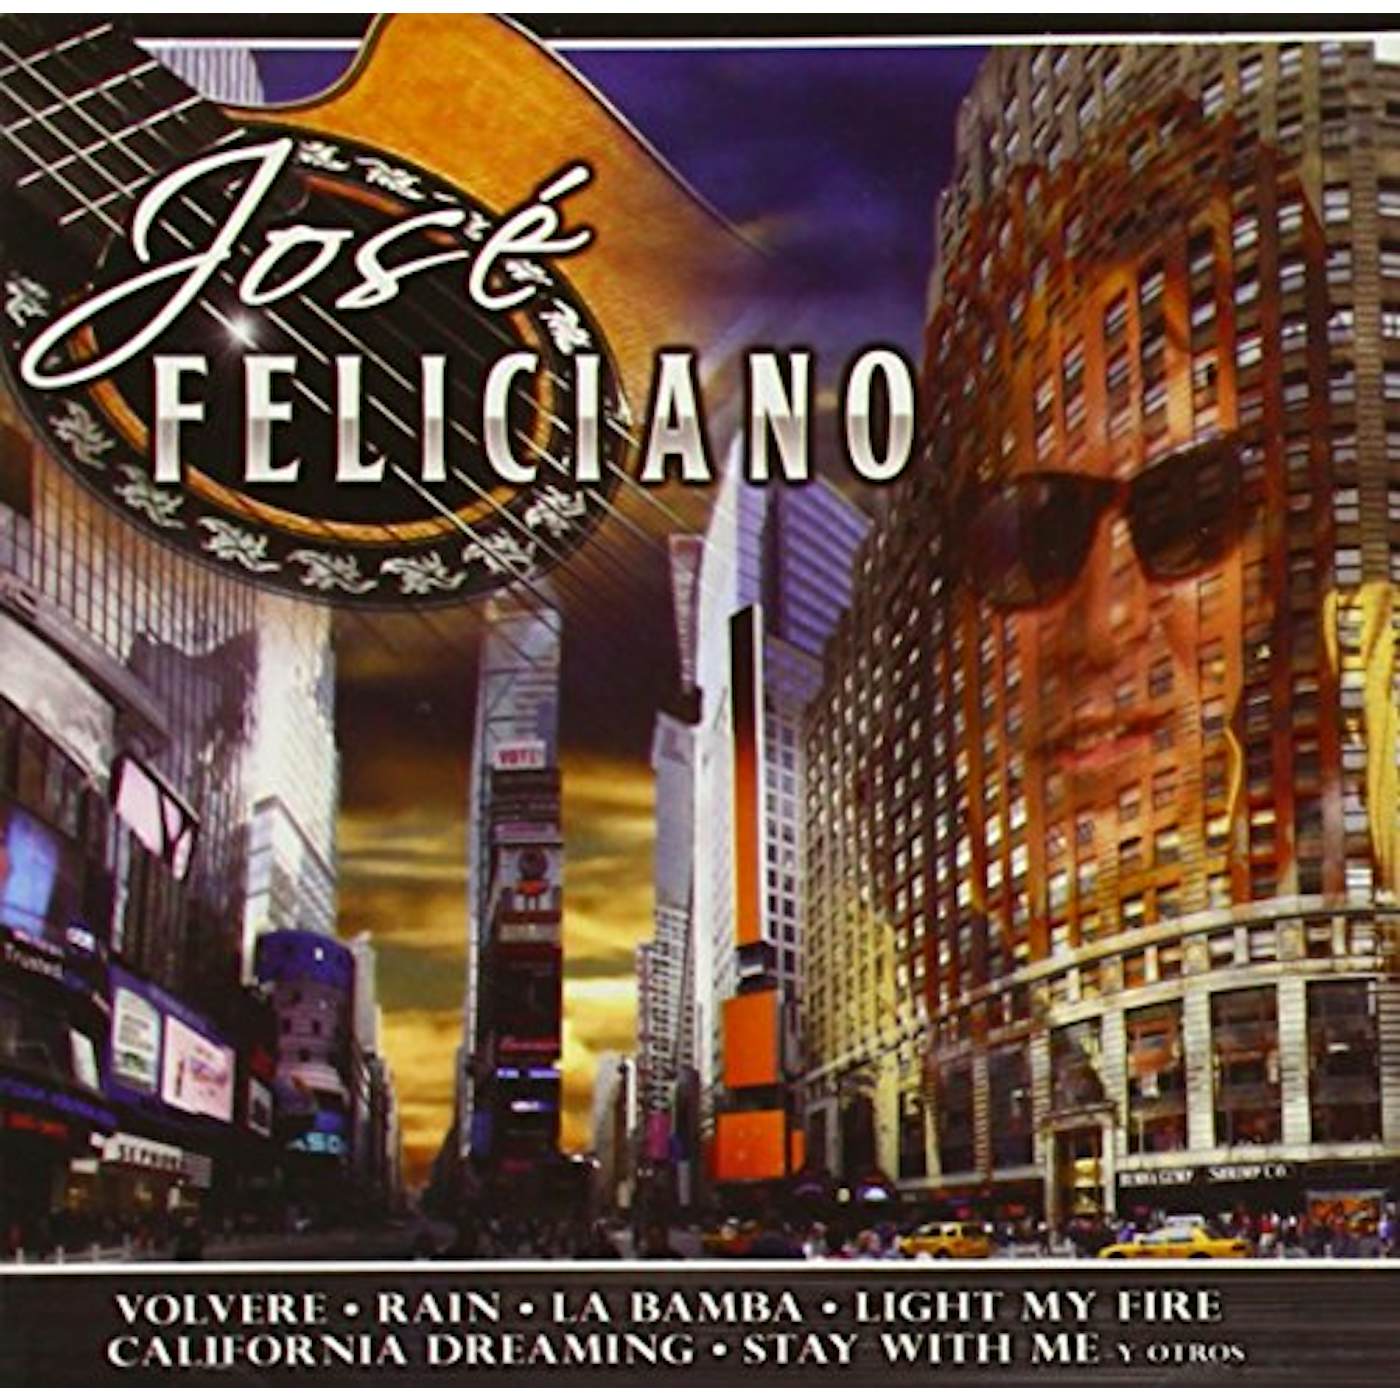 José Feliciano LIVE AT THE BLUE NOTE CD